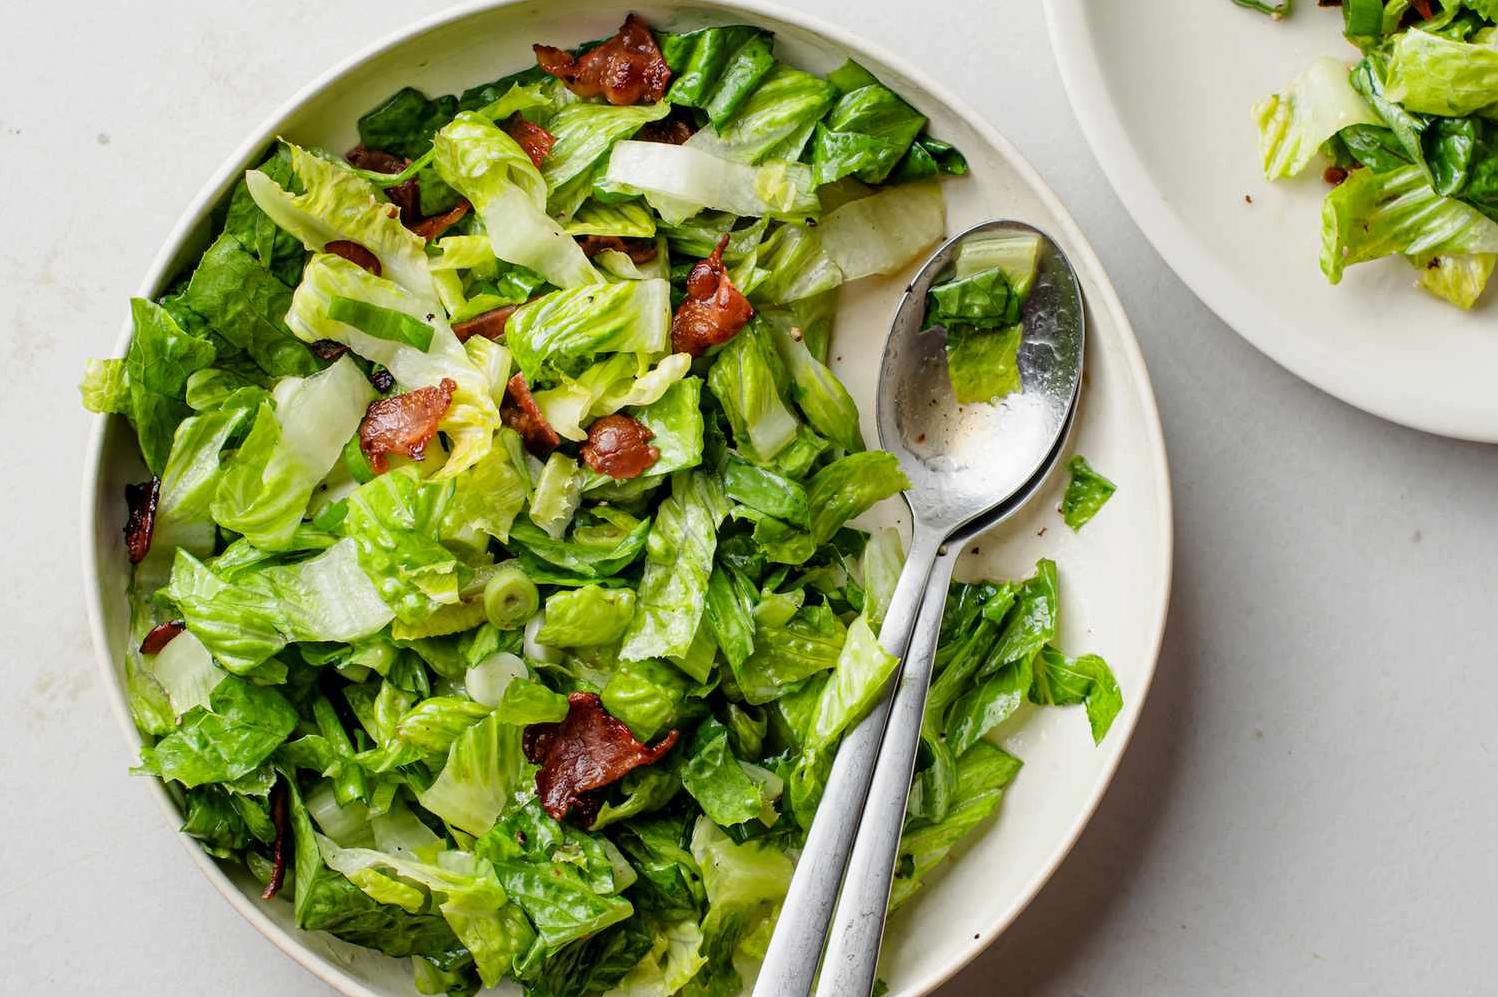 Southern Style Wilted Lettuce Salad